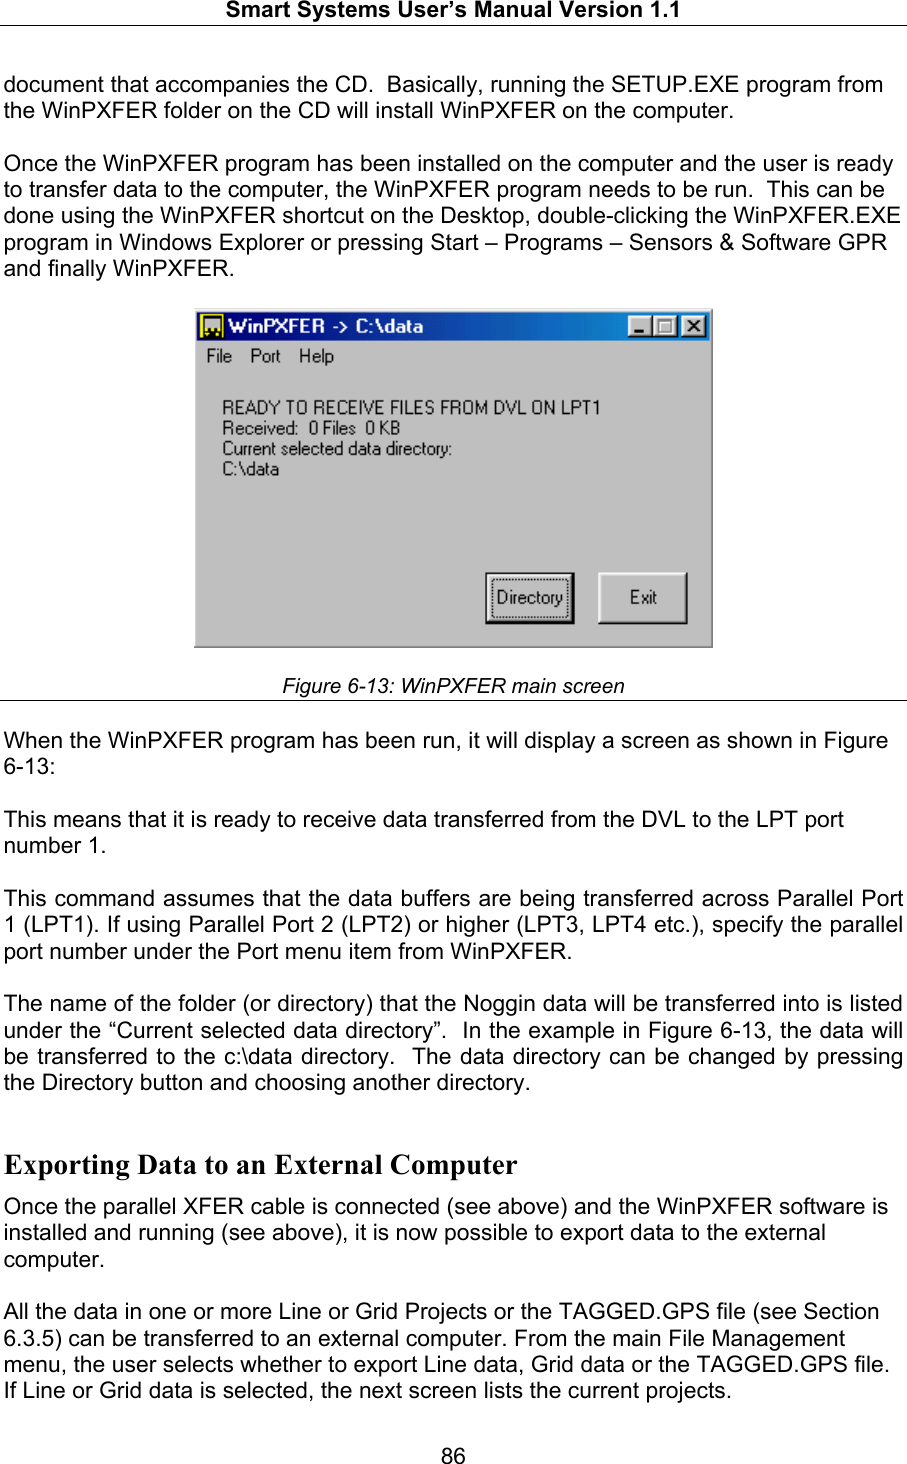   Smart Systems User’s Manual Version 1.1  86  document that accompanies the CD.  Basically, running the SETUP.EXE program from the WinPXFER folder on the CD will install WinPXFER on the computer.    Once the WinPXFER program has been installed on the computer and the user is ready to transfer data to the computer, the WinPXFER program needs to be run.  This can be done using the WinPXFER shortcut on the Desktop, double-clicking the WinPXFER.EXE program in Windows Explorer or pressing Start – Programs – Sensors &amp; Software GPR and finally WinPXFER.    Figure 6-13: WinPXFER main screen  When the WinPXFER program has been run, it will display a screen as shown in Figure 6-13:  This means that it is ready to receive data transferred from the DVL to the LPT port number 1.   This command assumes that the data buffers are being transferred across Parallel Port 1 (LPT1). If using Parallel Port 2 (LPT2) or higher (LPT3, LPT4 etc.), specify the parallel port number under the Port menu item from WinPXFER.  The name of the folder (or directory) that the Noggin data will be transferred into is listed under the “Current selected data directory”.  In the example in Figure 6-13, the data will be transferred to the c:\data directory.  The data directory can be changed by pressing the Directory button and choosing another directory.  Exporting Data to an External Computer Once the parallel XFER cable is connected (see above) and the WinPXFER software is installed and running (see above), it is now possible to export data to the external computer.  All the data in one or more Line or Grid Projects or the TAGGED.GPS file (see Section 6.3.5) can be transferred to an external computer. From the main File Management menu, the user selects whether to export Line data, Grid data or the TAGGED.GPS file.  If Line or Grid data is selected, the next screen lists the current projects.   